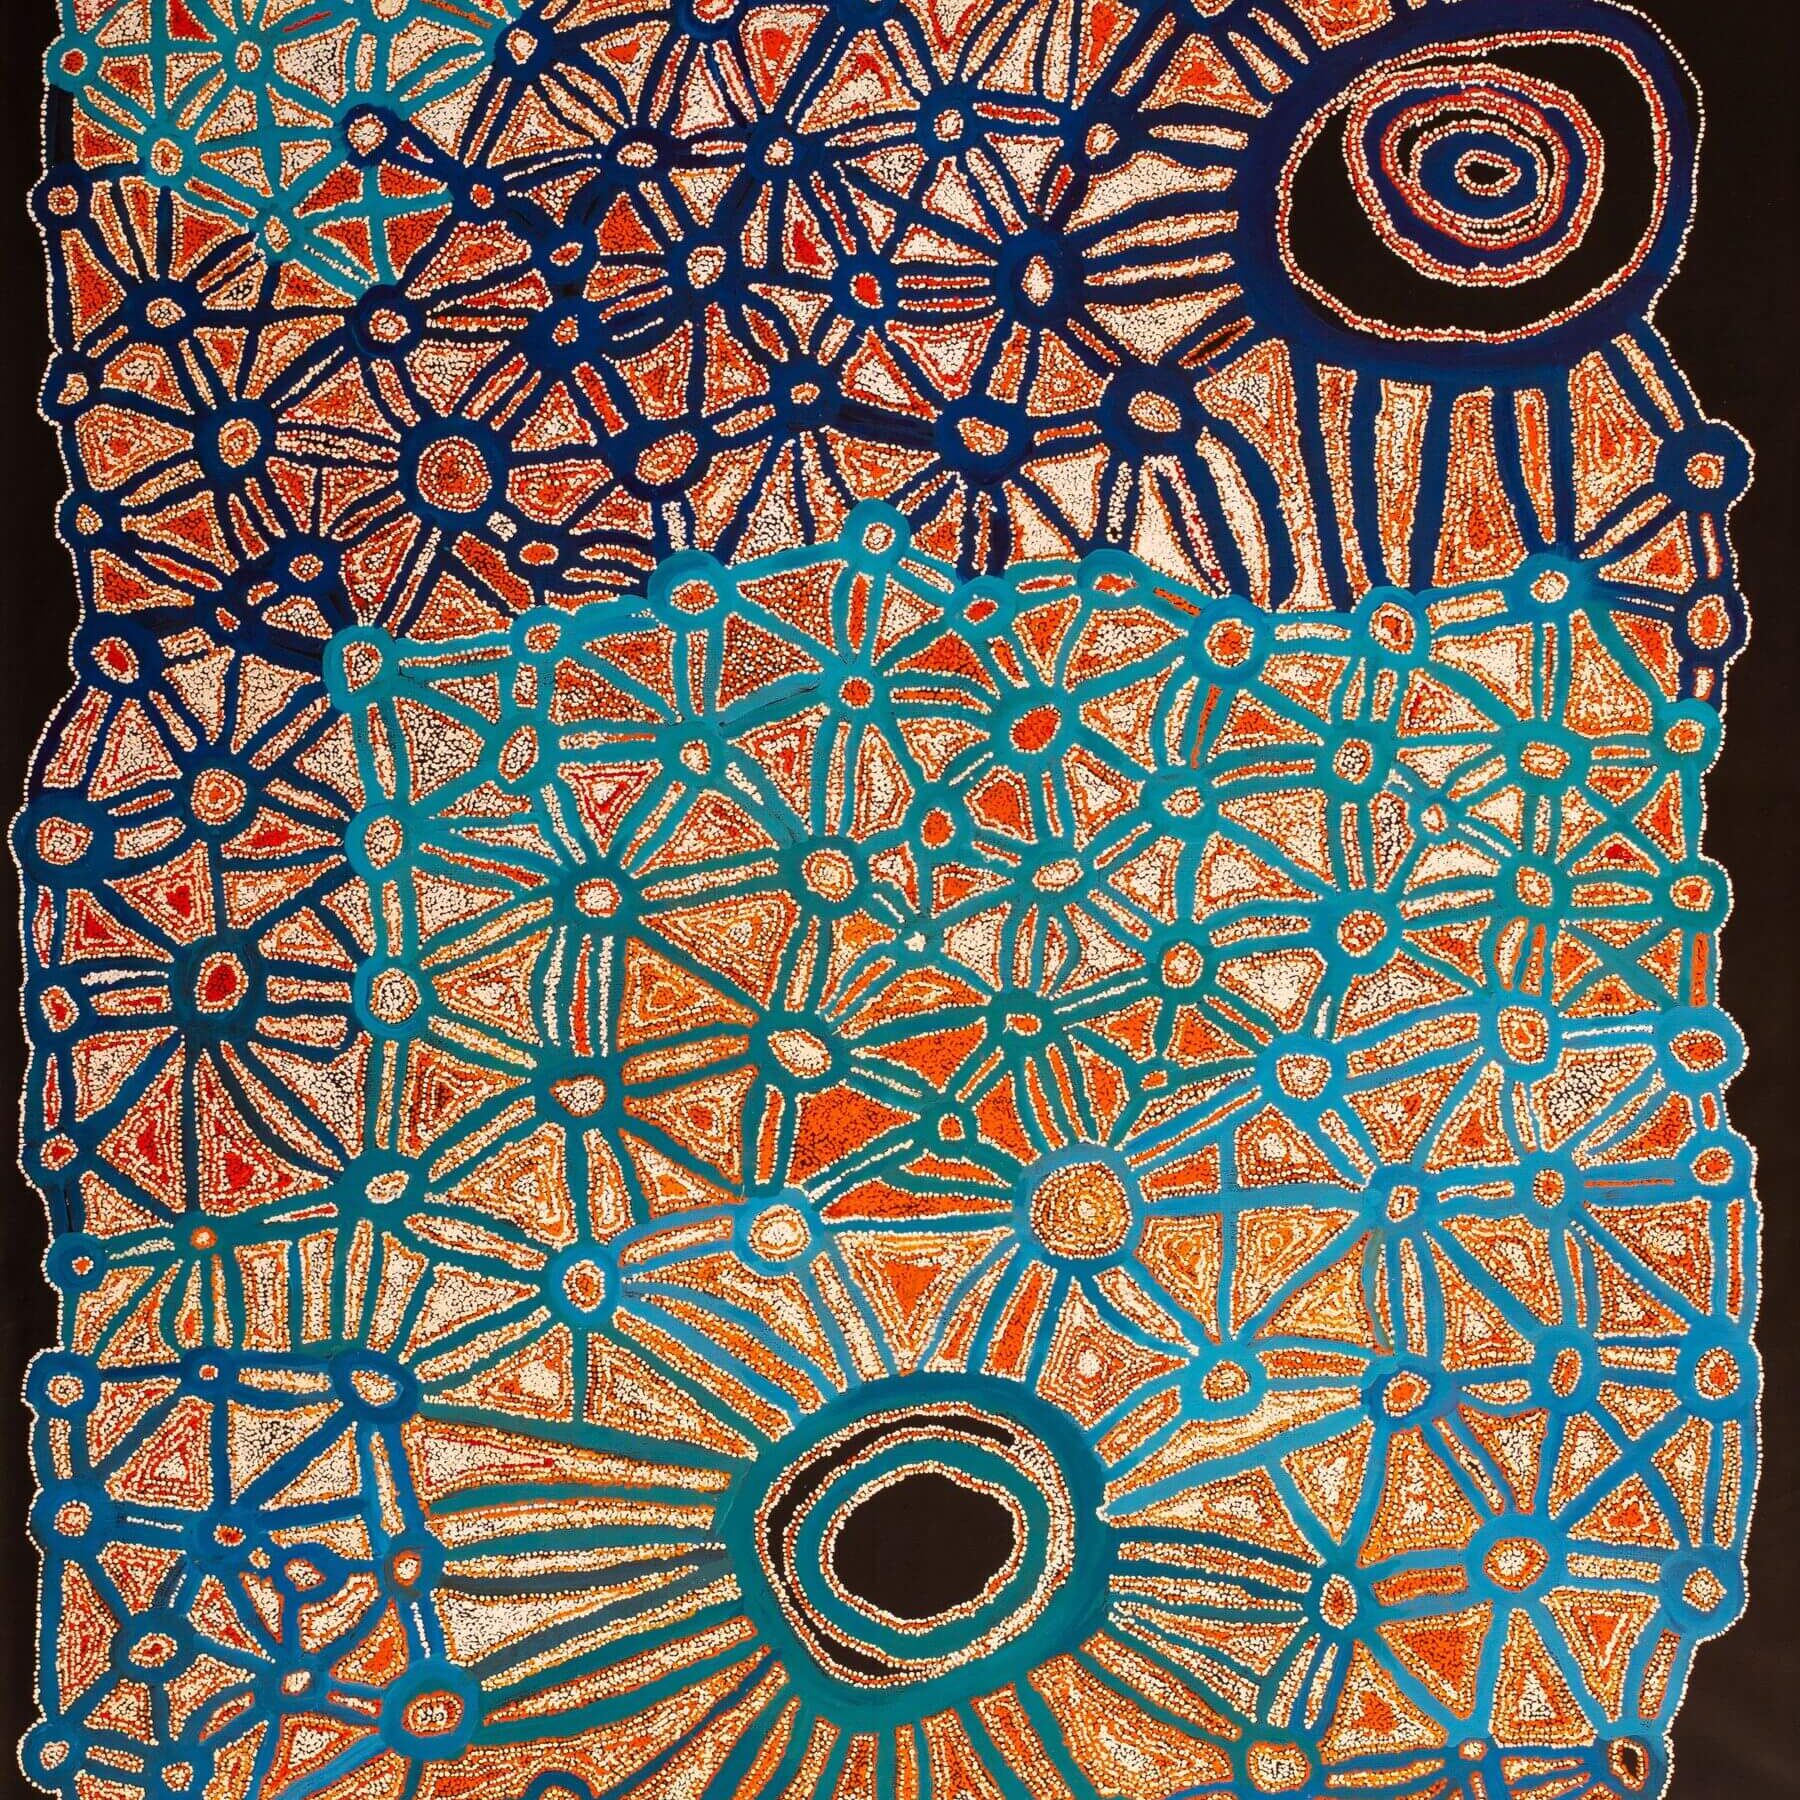 Painting from Spinifex Arts by Aboriginal Artist Fred Grant